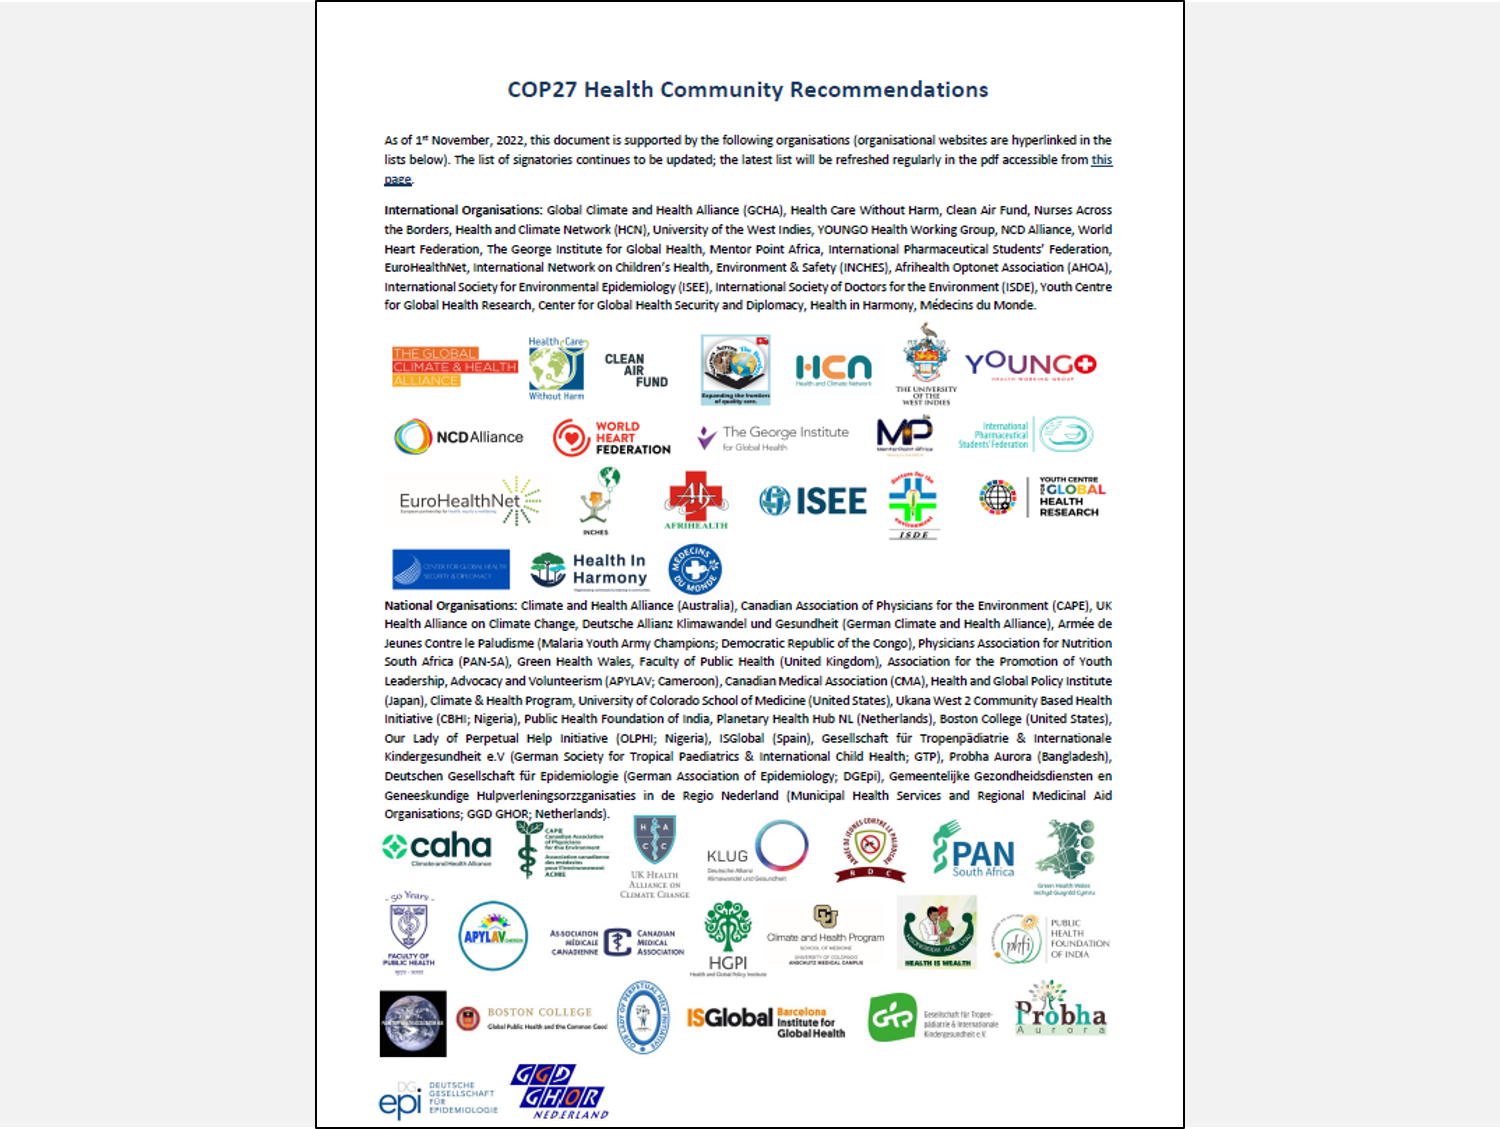 [Announcement] HGPI Planetary Health Policy Team Joins Call for “COP27 Health Community Policy Recommendations” (November 8, 2022)